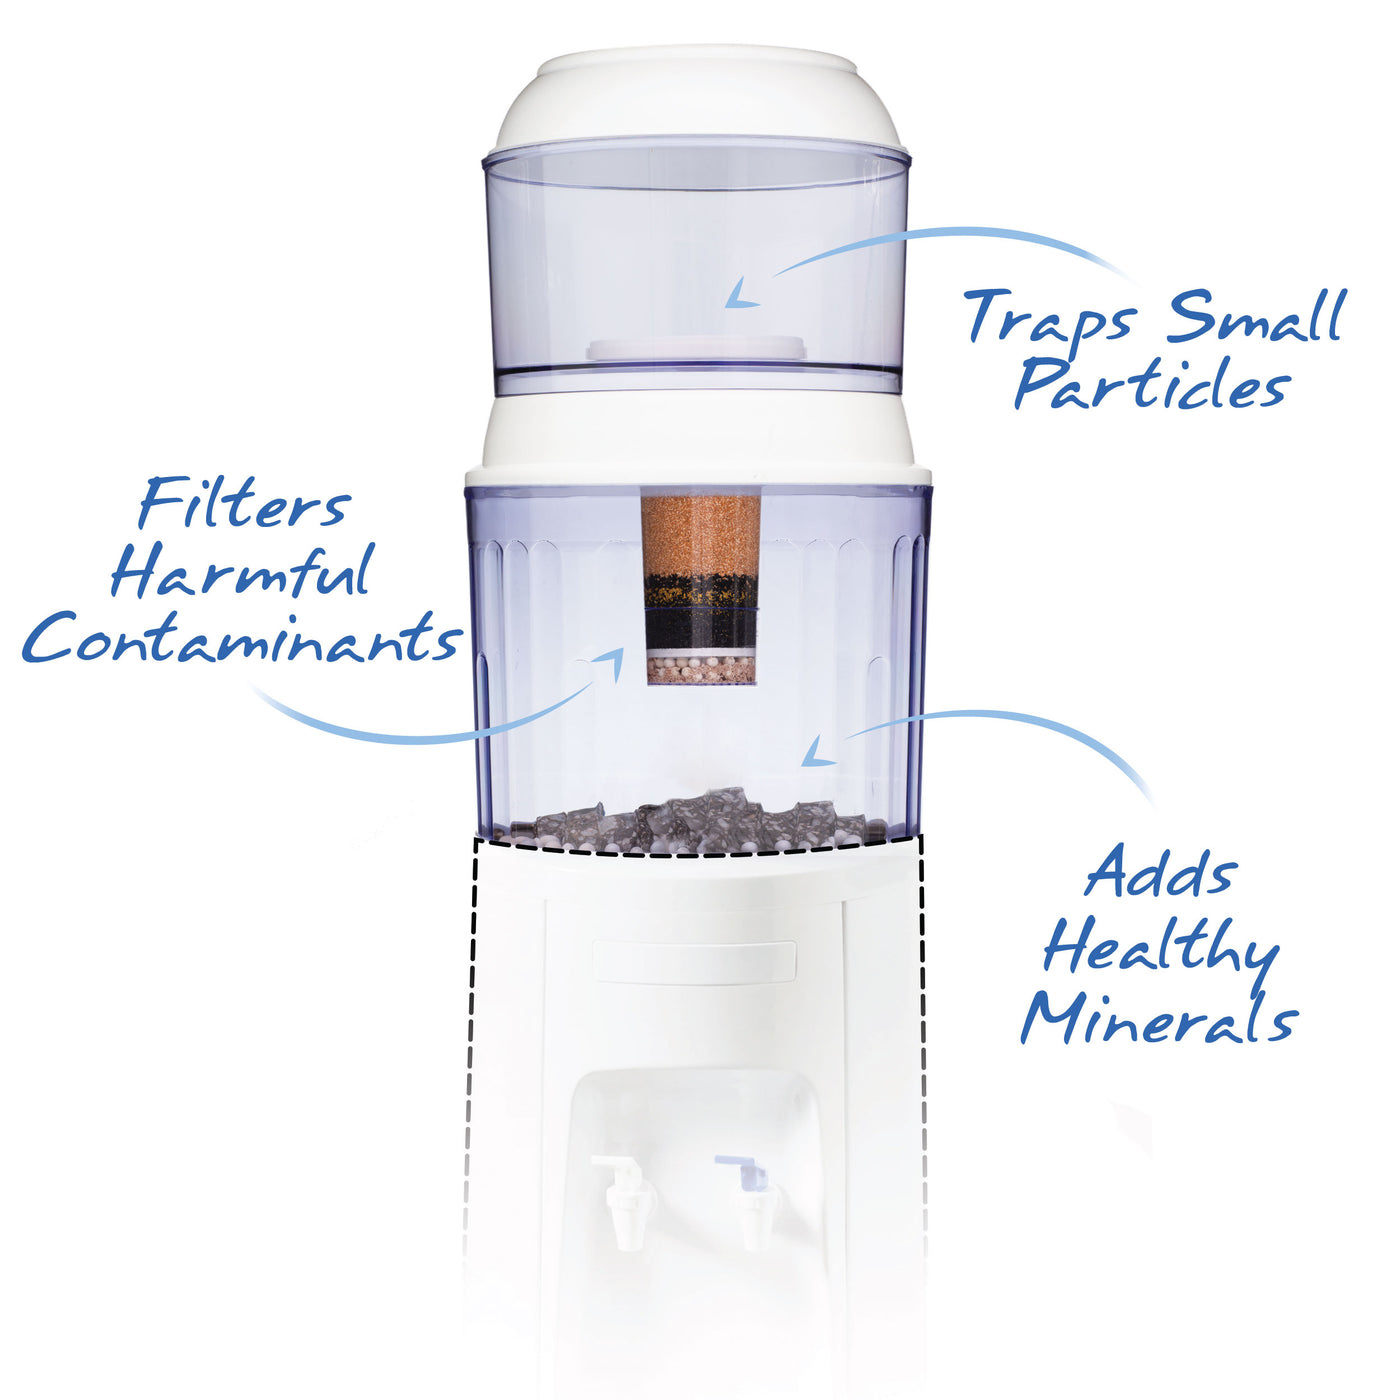 The Santevia Gravity Water System Countertop Traps Small Particles, Filters Harmful Contaminants, and Adds Healthy Minerals#model_dispenser